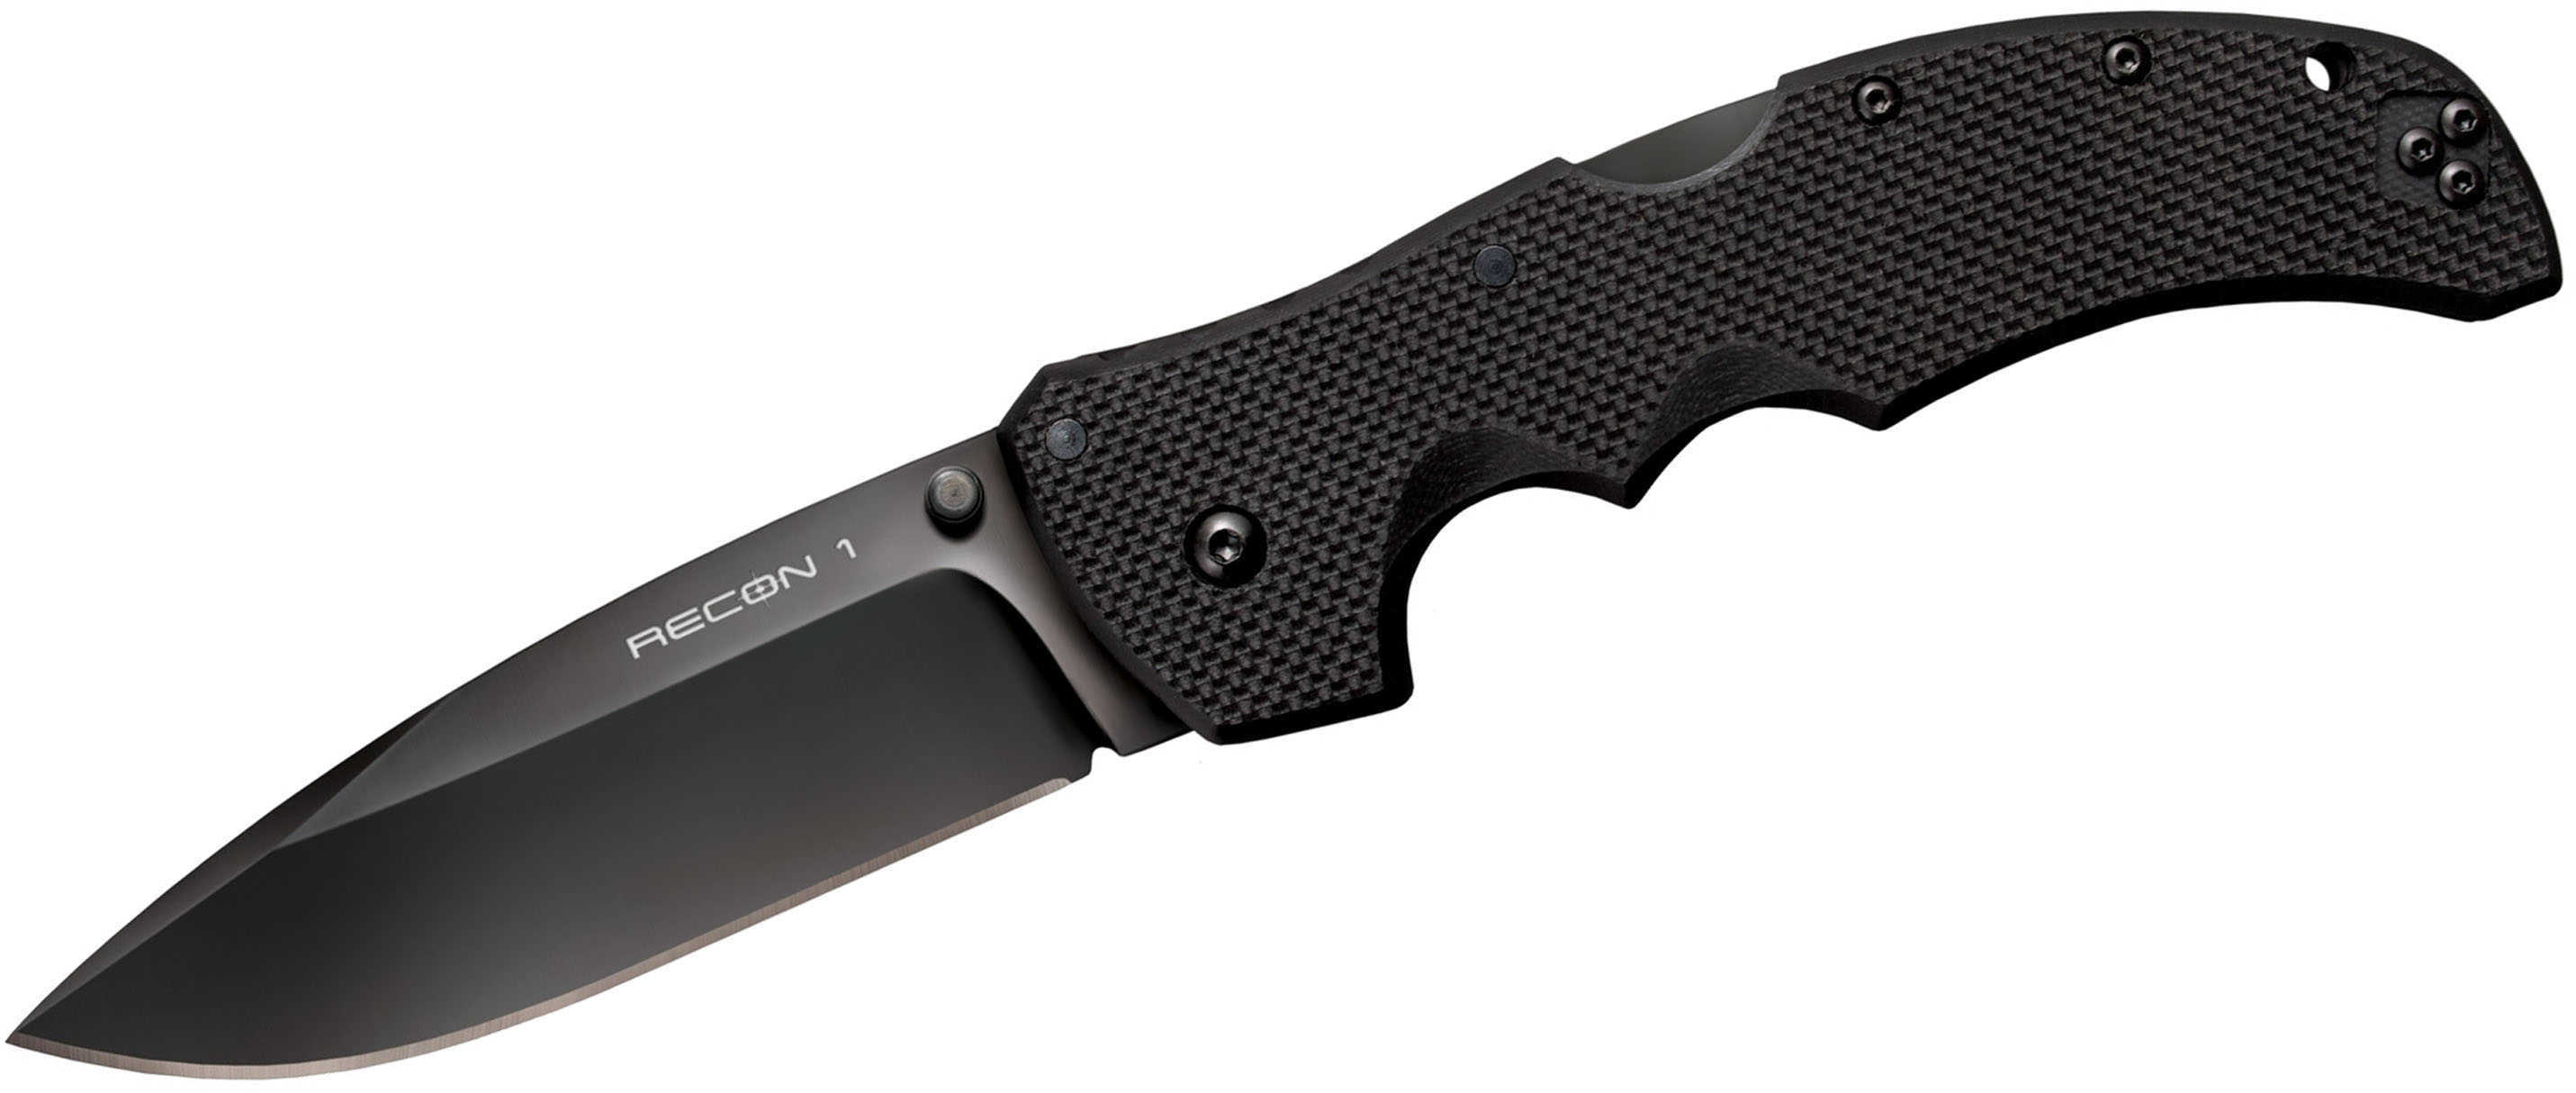 Cold Steel Recon 1 Folding Knife S35VN with DLC Coating Plain Edge Spear Point 4" Blade 27BS